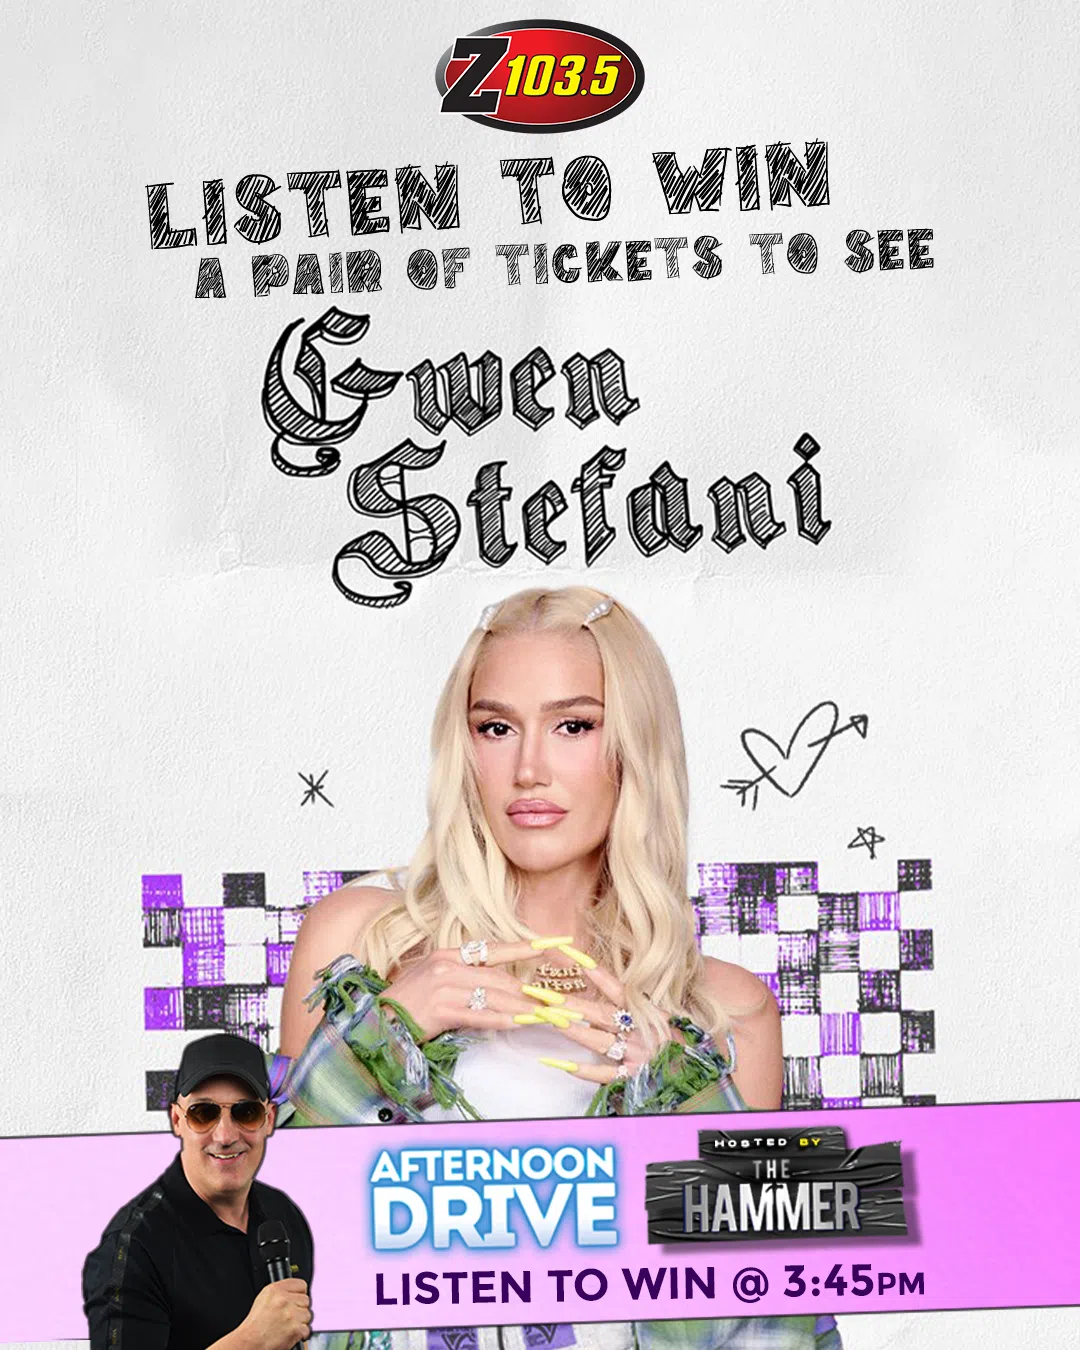 Feature: https://z1035.com/win/win-a-pair-of-tickets-to-see-gwen-stefani/